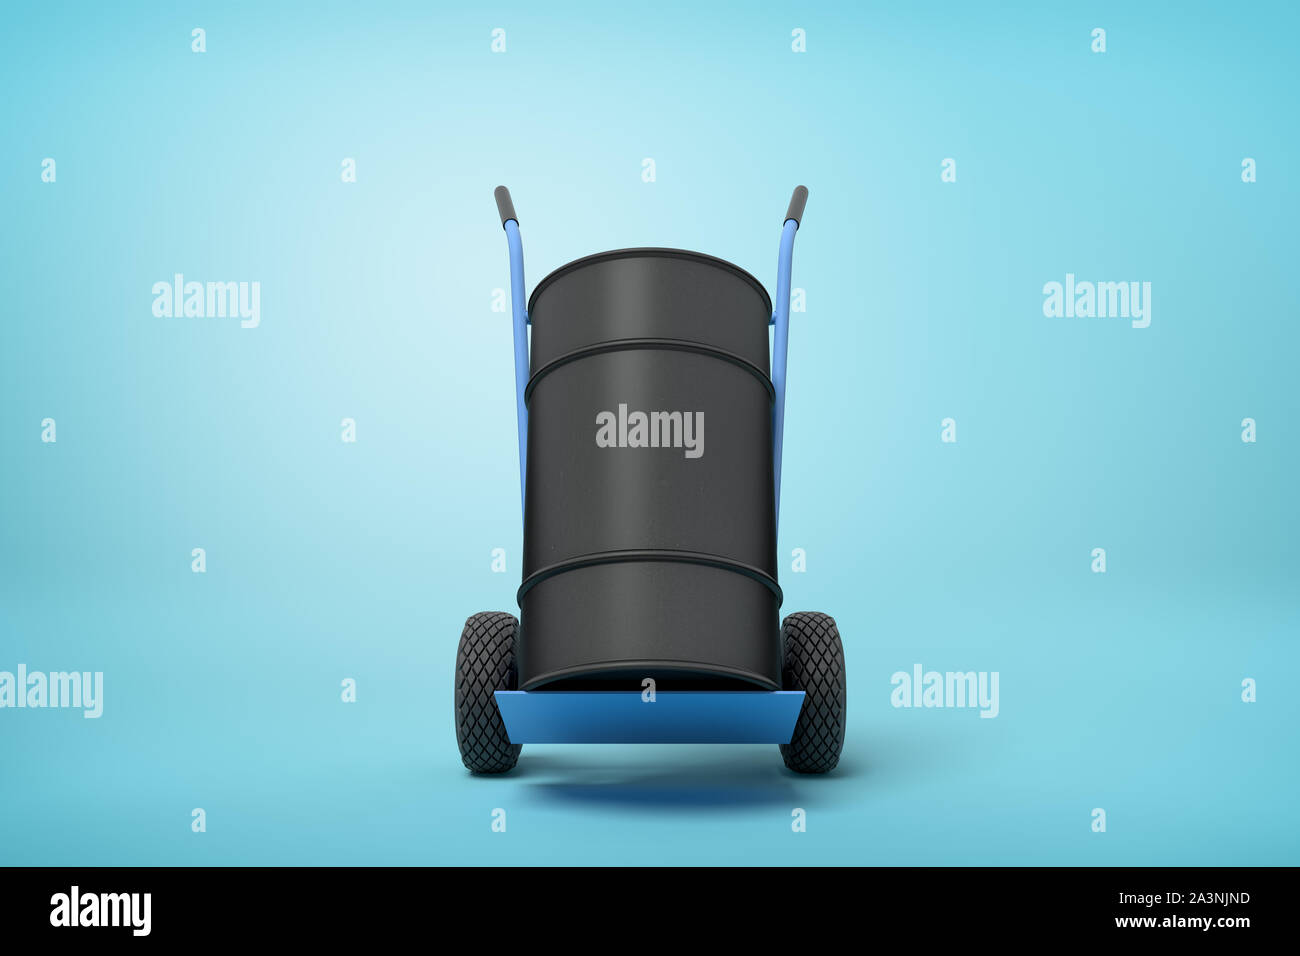 3d rendering of black barrel standing on top of blue hand truck on light-blue background. Stock Photo